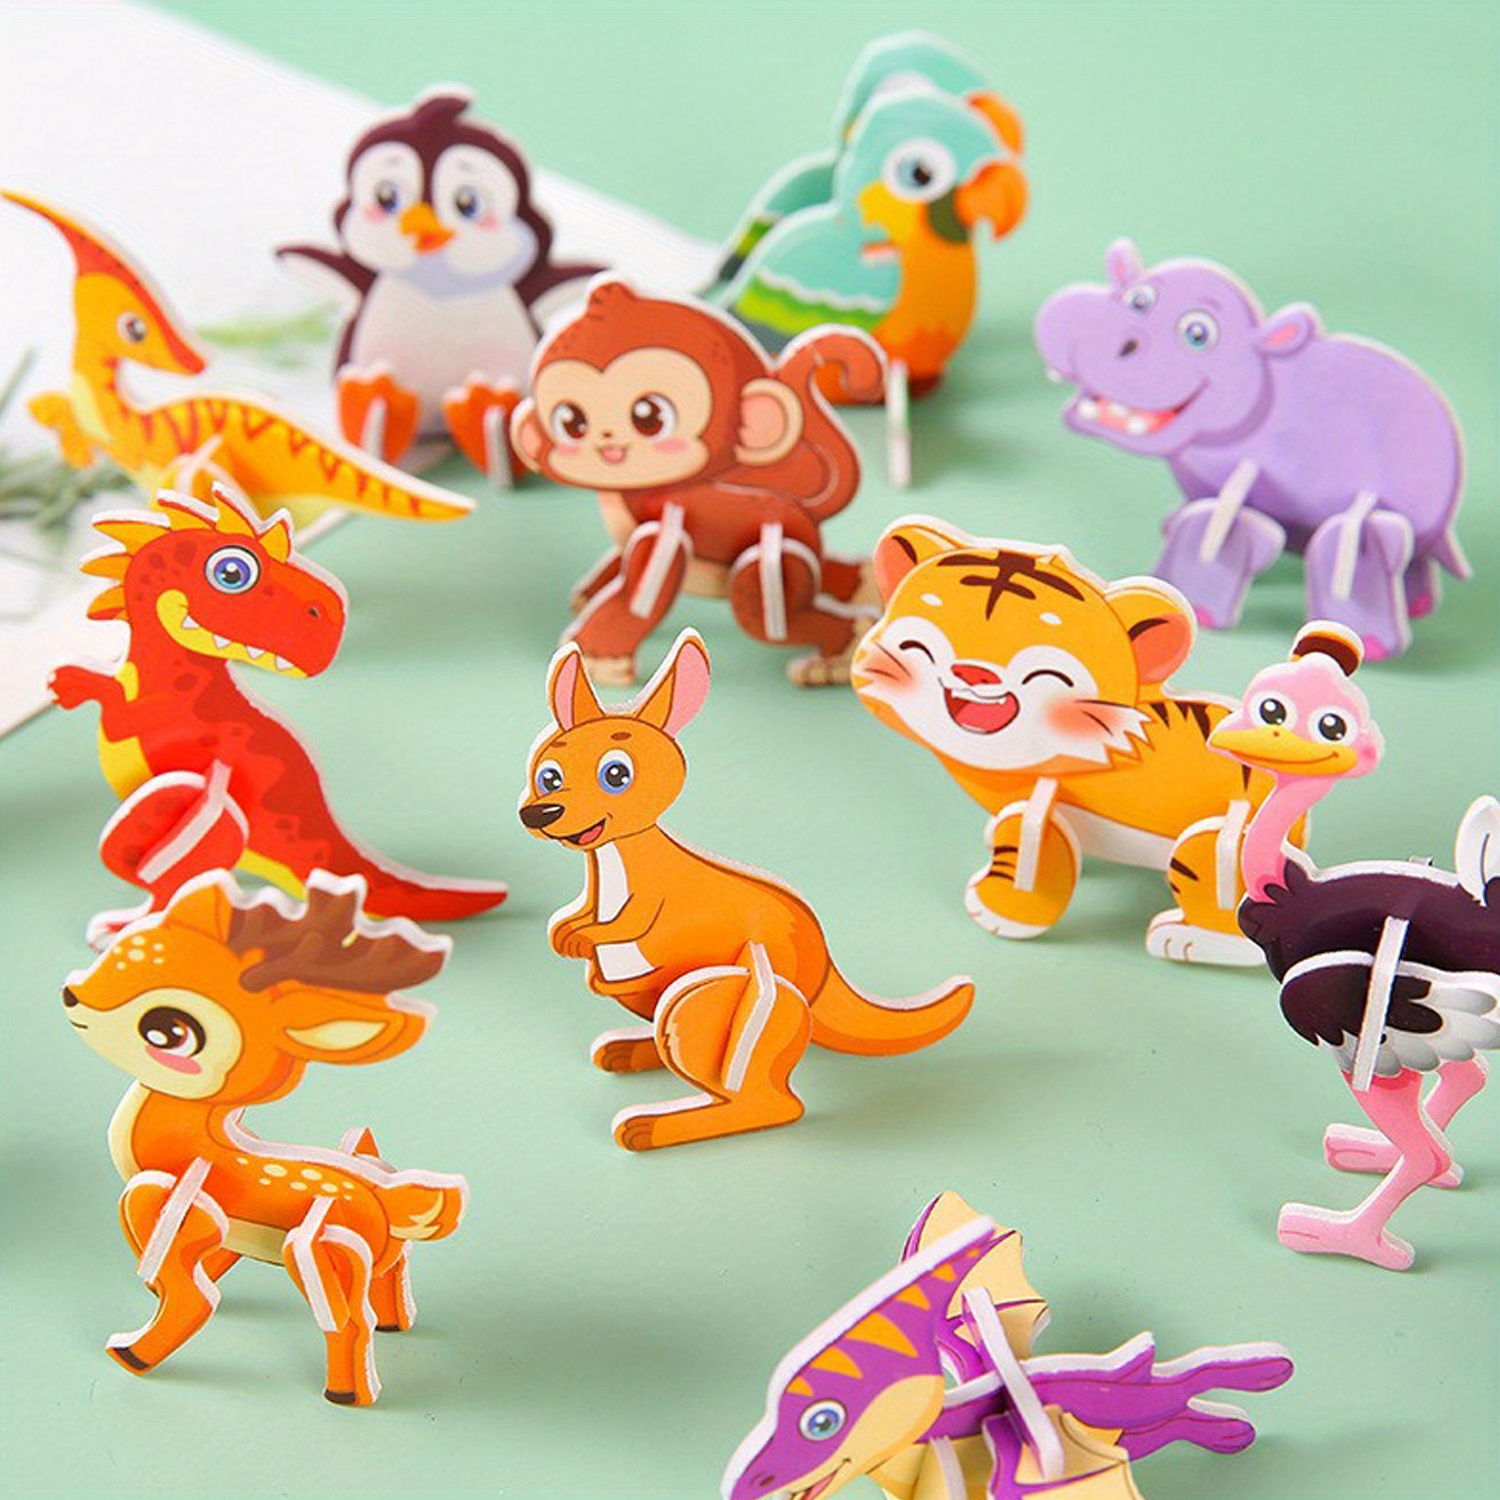 

60pcs 3d Paper Animal Puzzles For Teens And Adults, 14+, Educational Diy Jigsaw Crafting Kits, Party Favors And Rewards